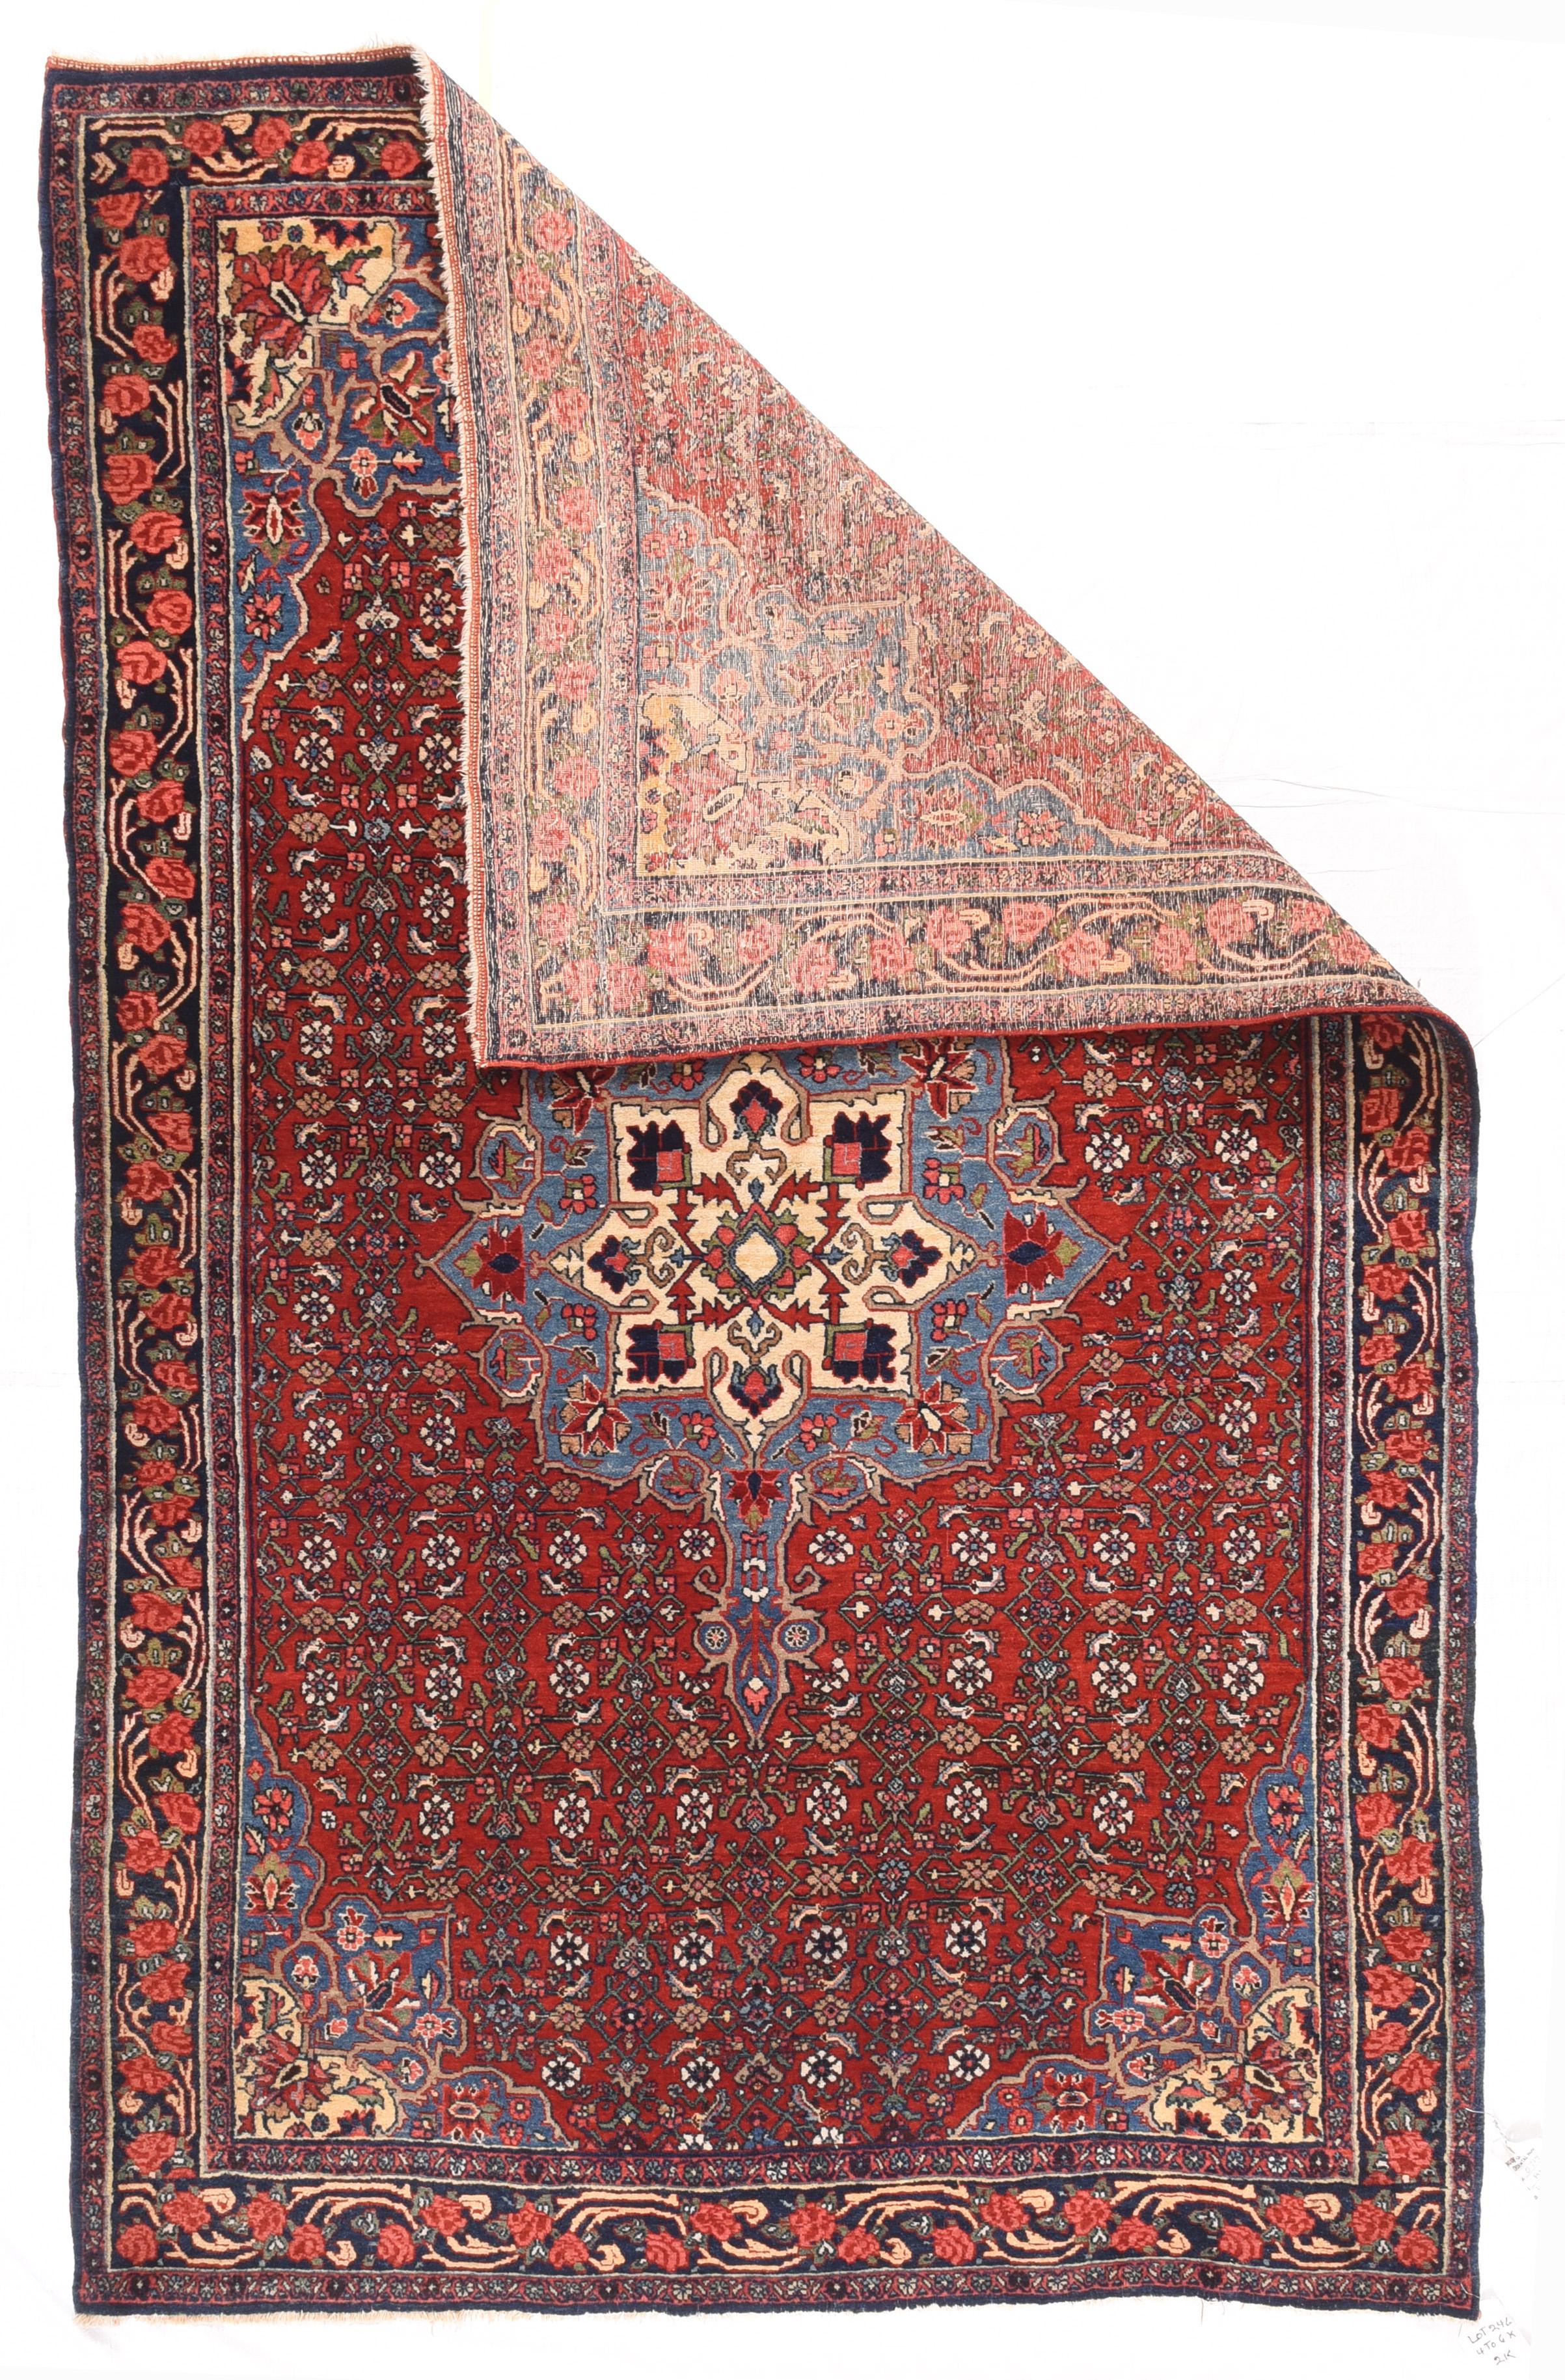 Vintage Bidjar Rug 4'3'' x 6'10''. A teal blue spearhead finialed octogramme medallion enclosing a conforming cream Sub medallion with radiating palmettes, floats on the close red Herati field. The teal corners carry on the chromatic theme. Red and